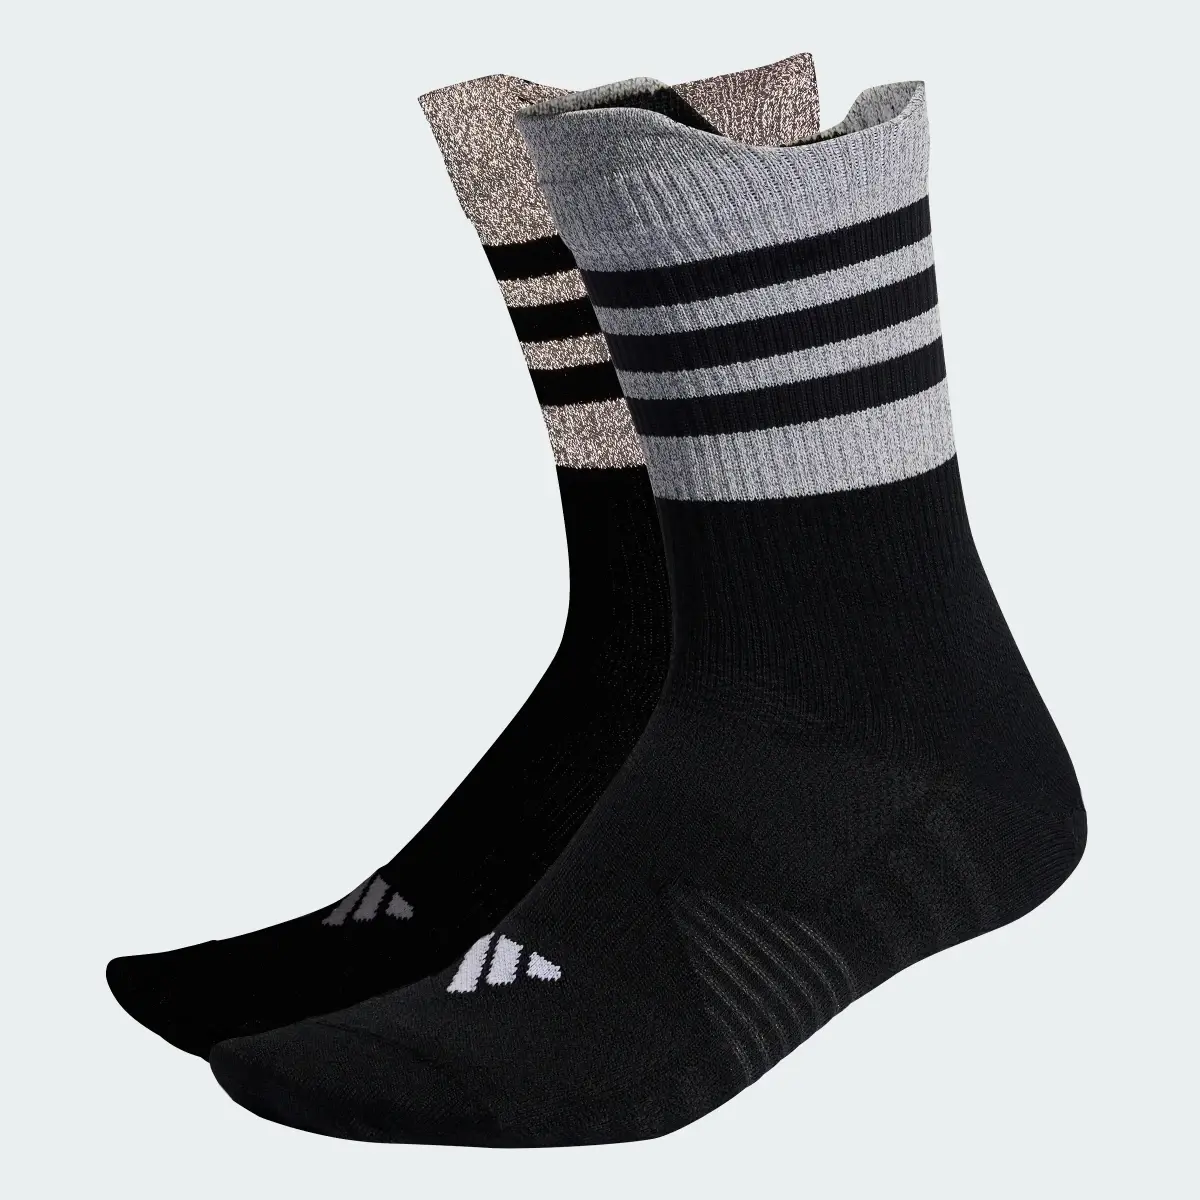 Adidas Chaussettes Running x Reflective (1 paire). 2